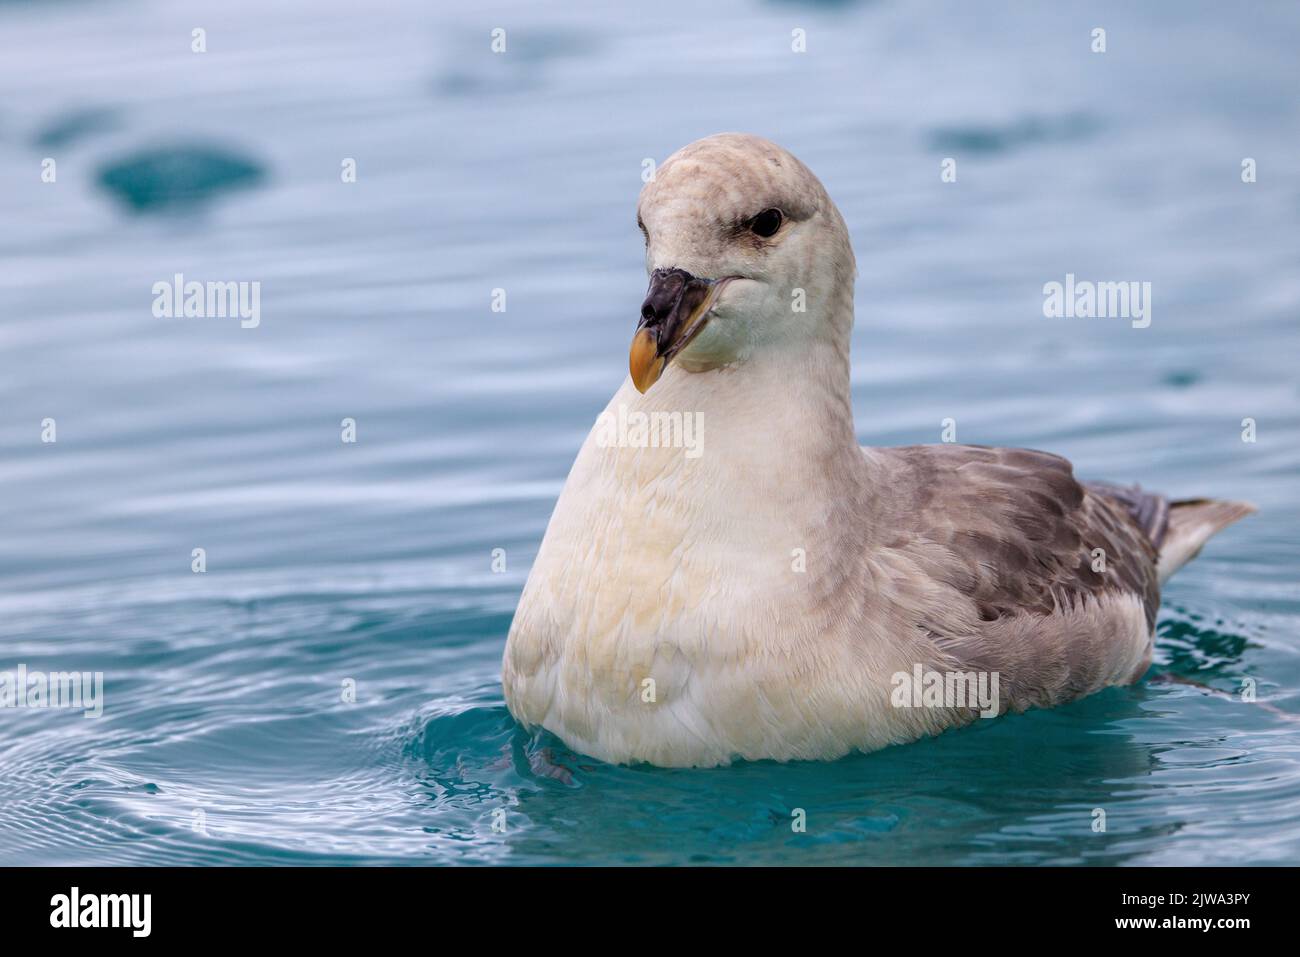 a northern fulmar sitting paddling on an icy calm sea in svalbard close up image facing forward prominent nostril tube Stock Photo